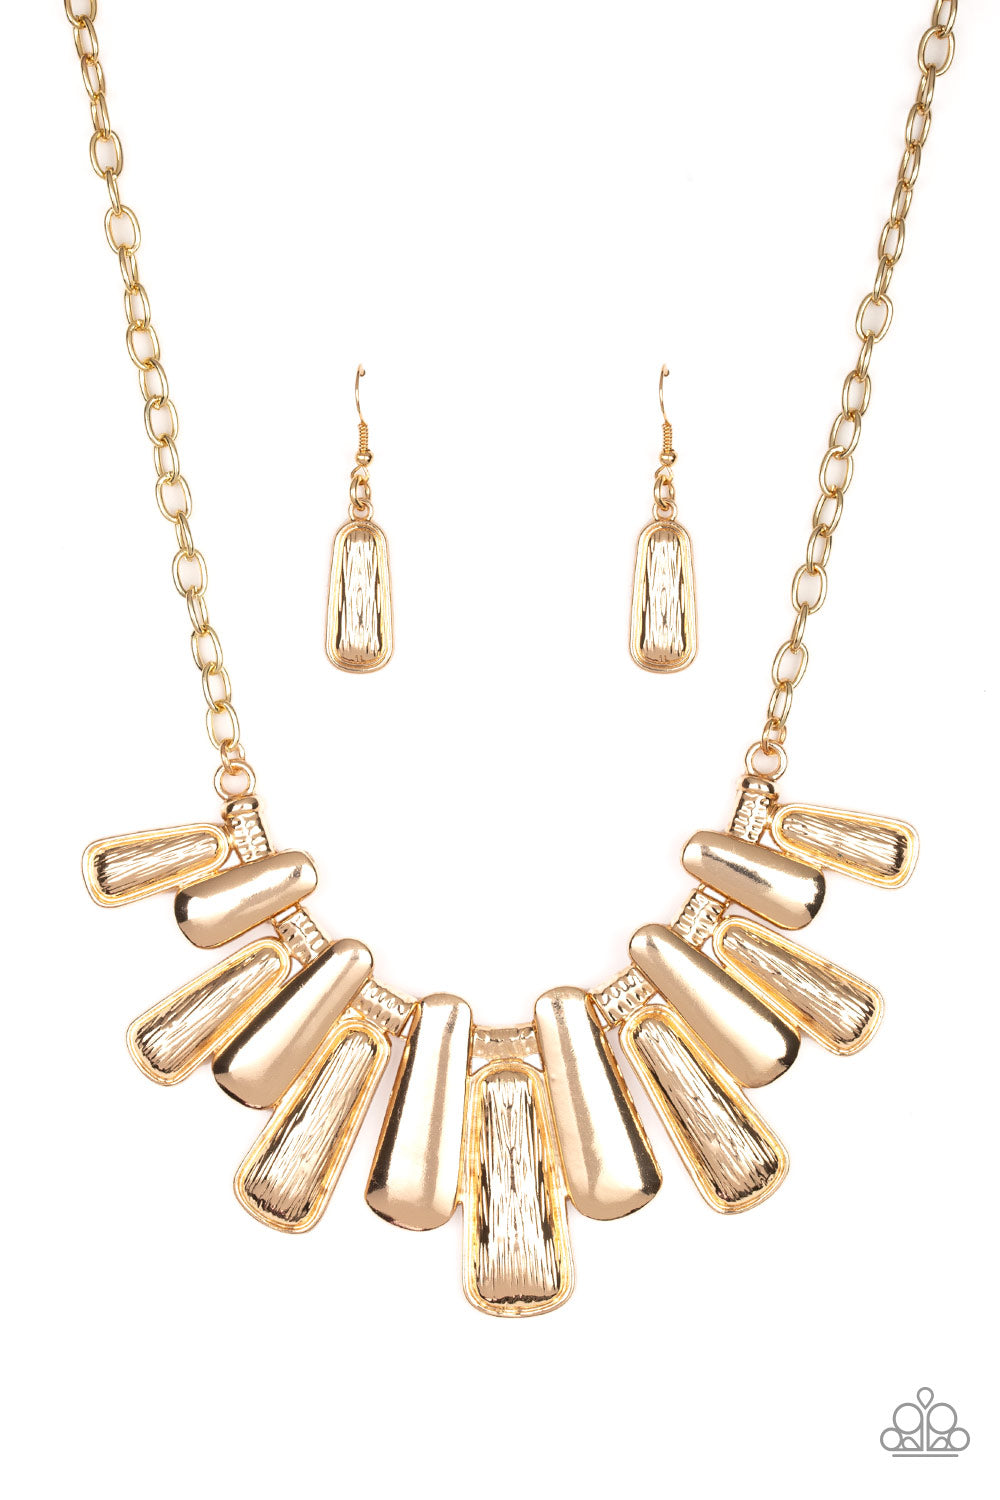 MANE Up Gold Necklace - Paparazzi Accessories